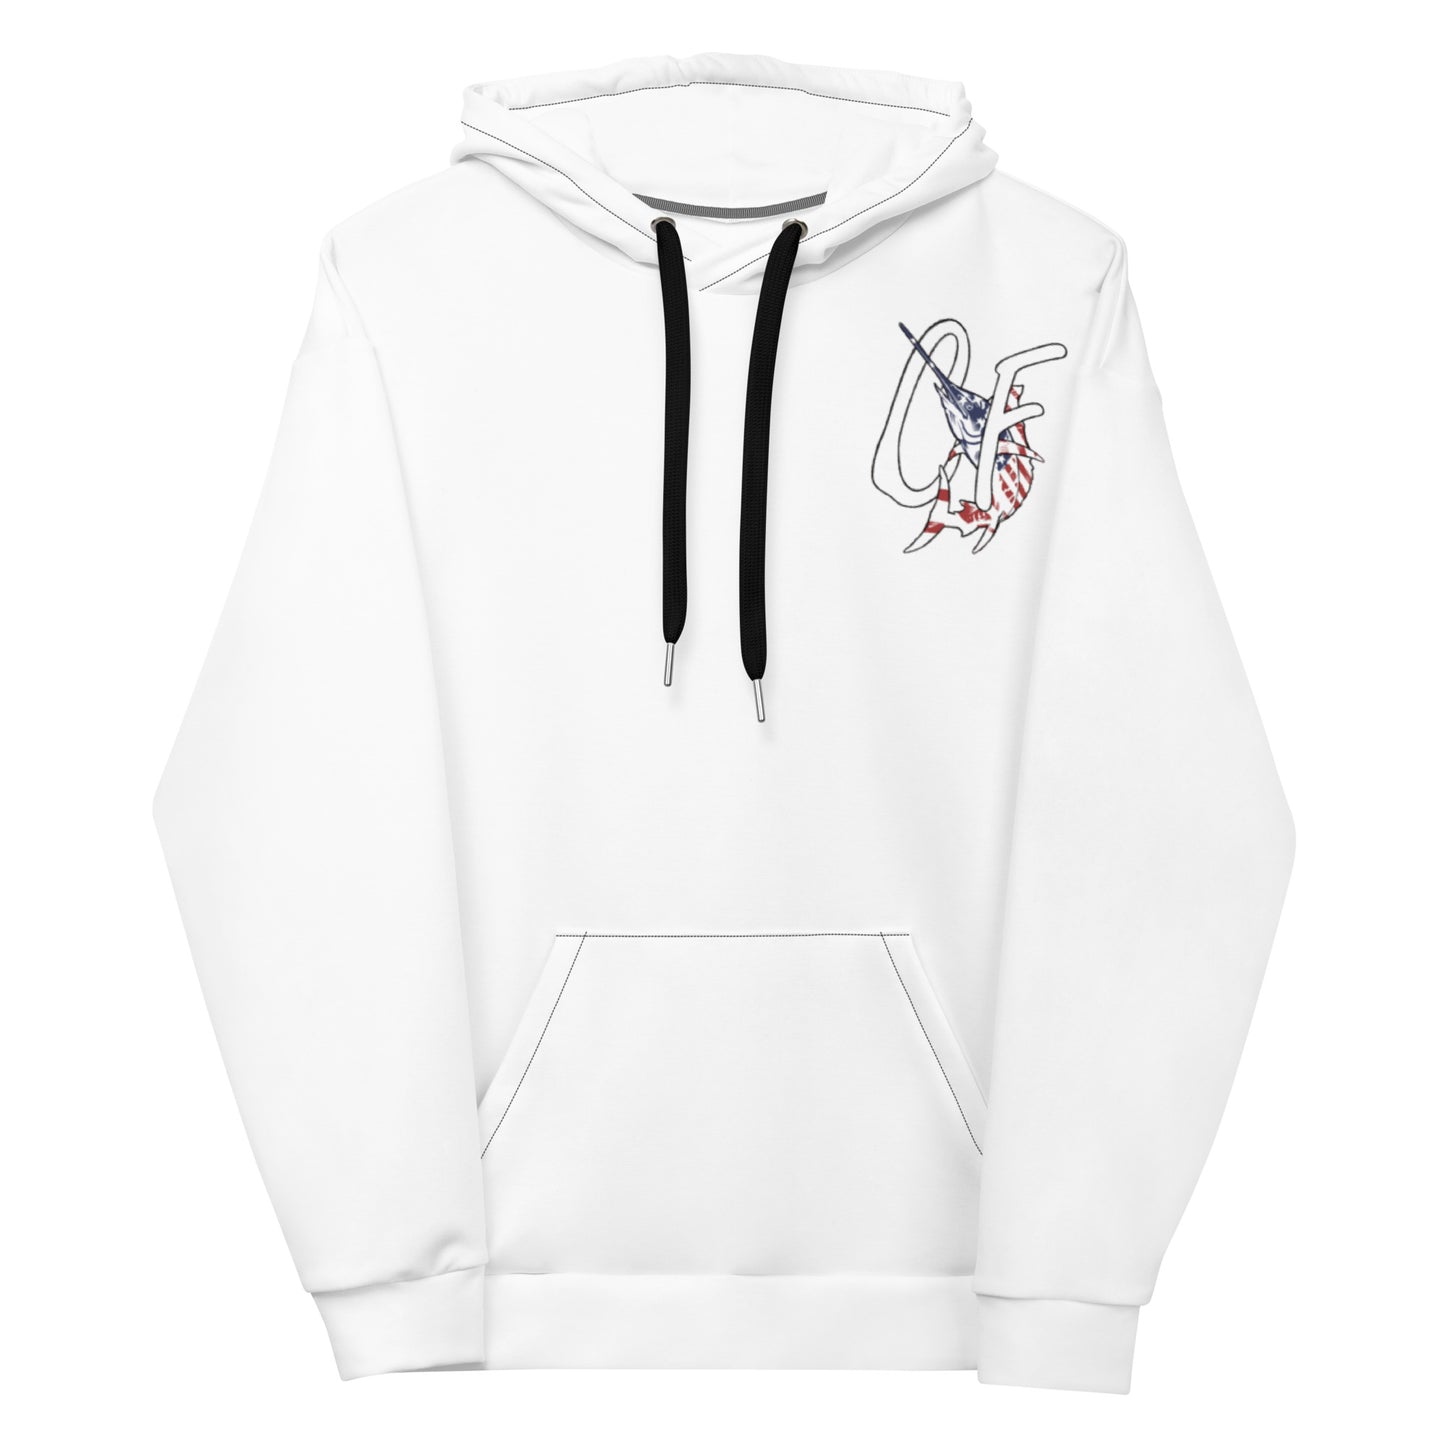 'Not On Our Watch' Hooded Sweatshirt for Men and Women